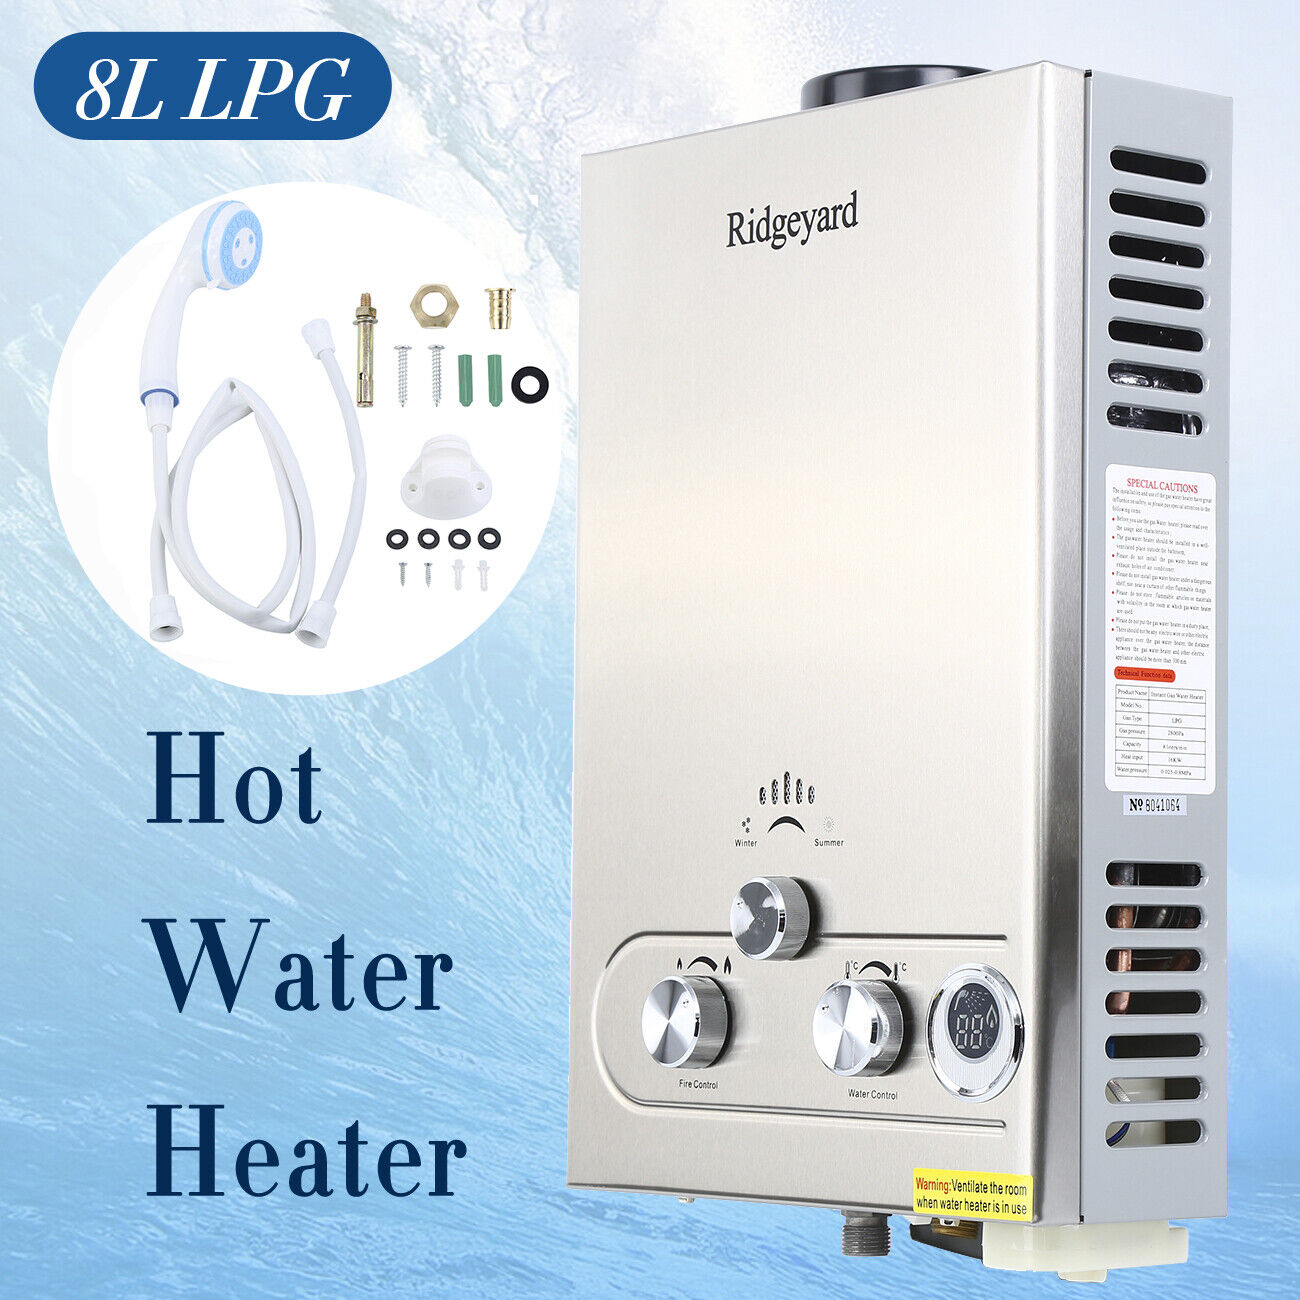 8L 2GPM Hot Water Heater LPG Propane Gas Tankless Instant Boiler Home w/ Shower